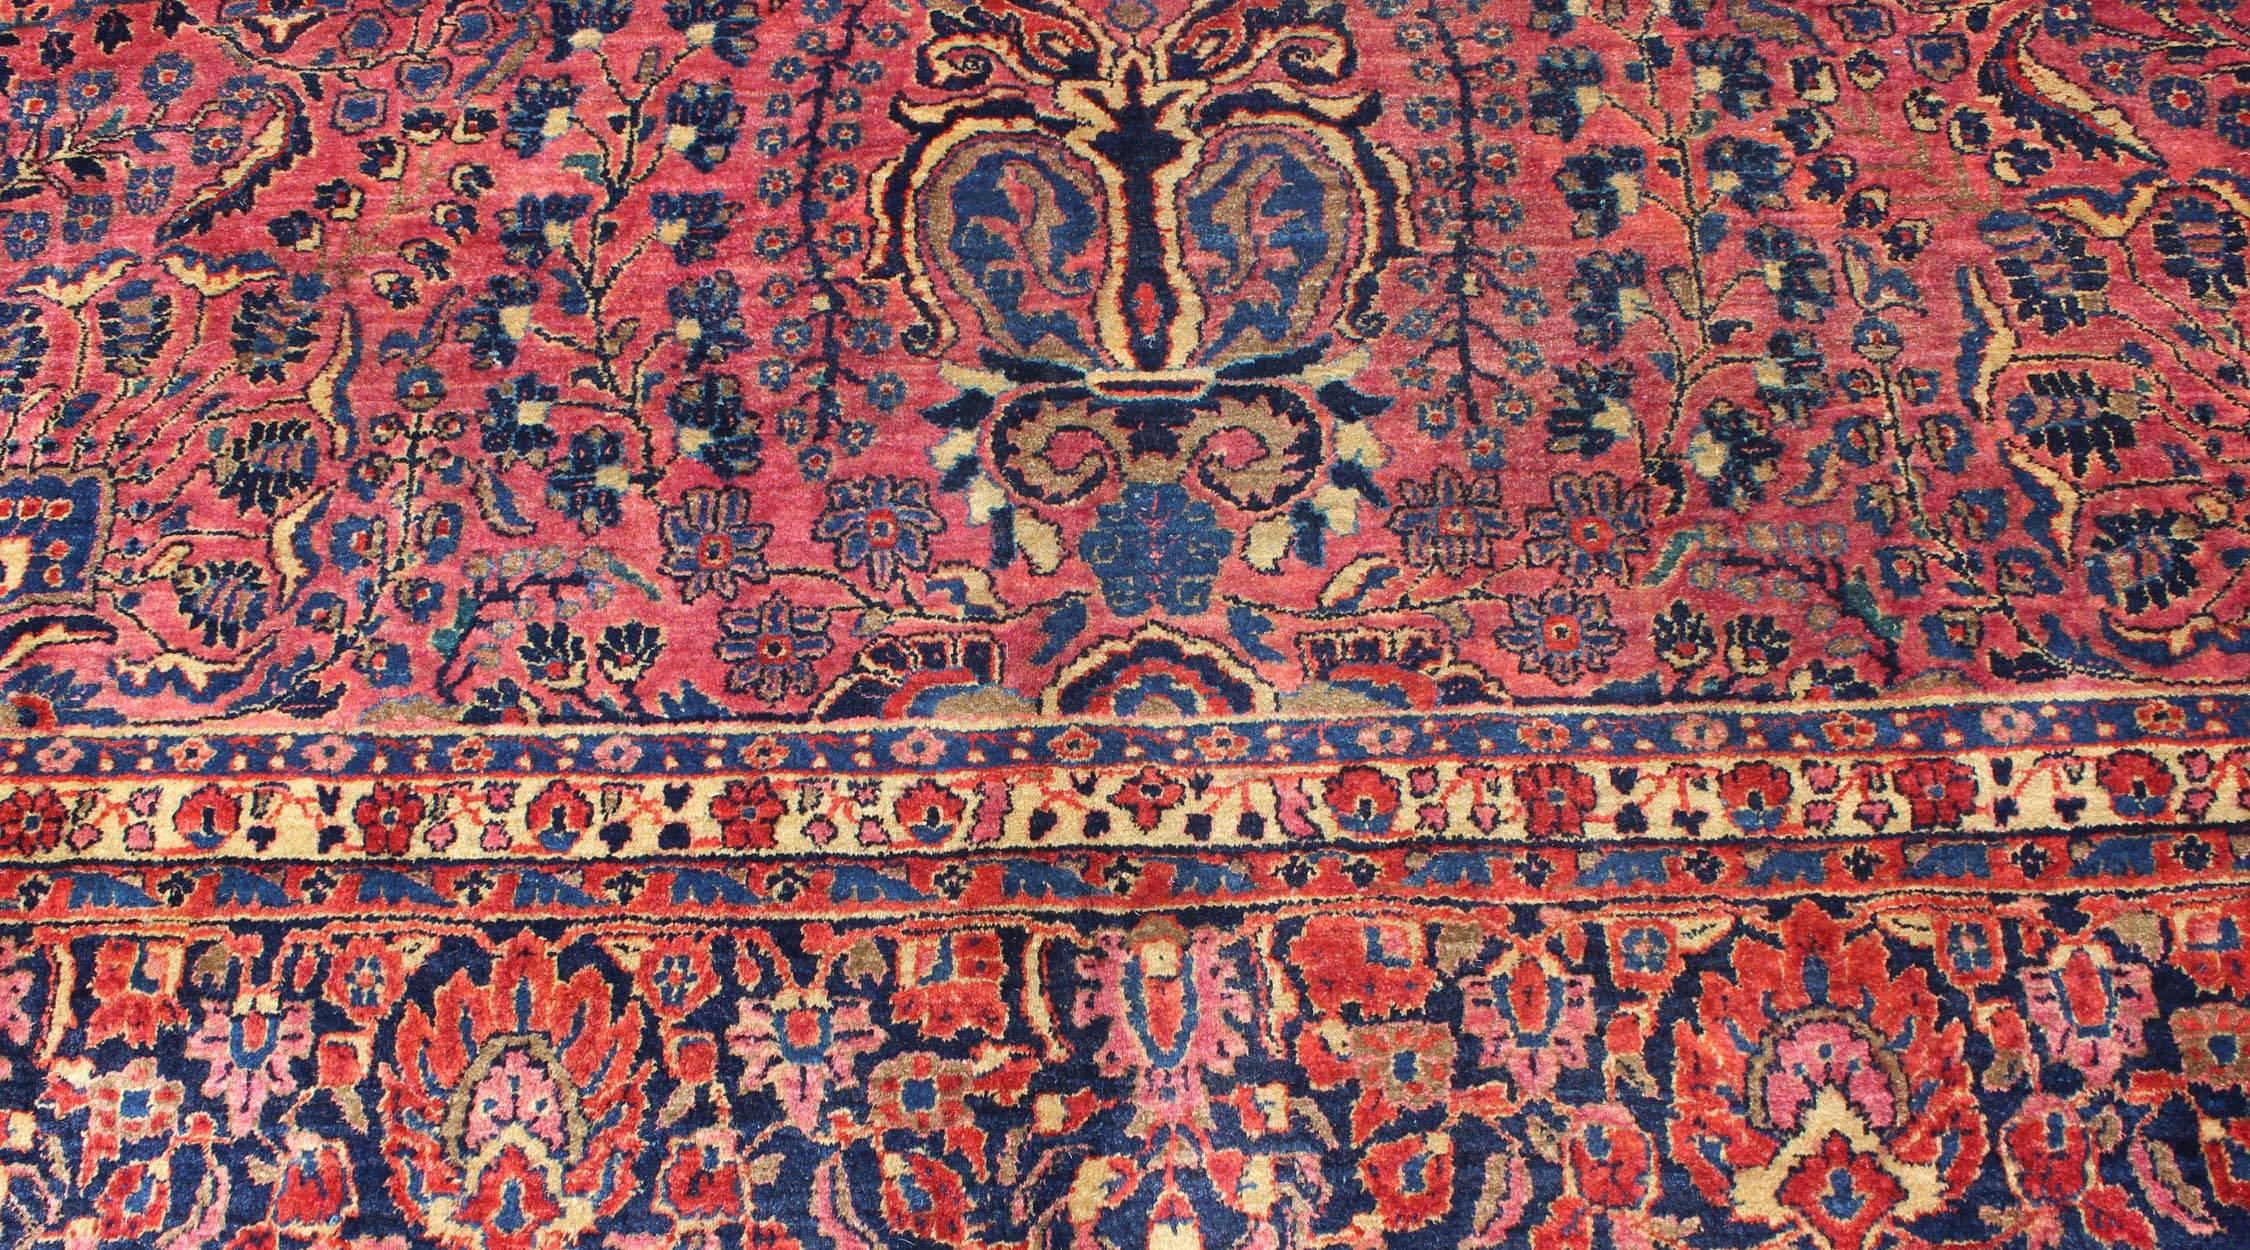 Antique Persian Sarouk Carpet with Deep Cranberry Field and Floral Elements 2